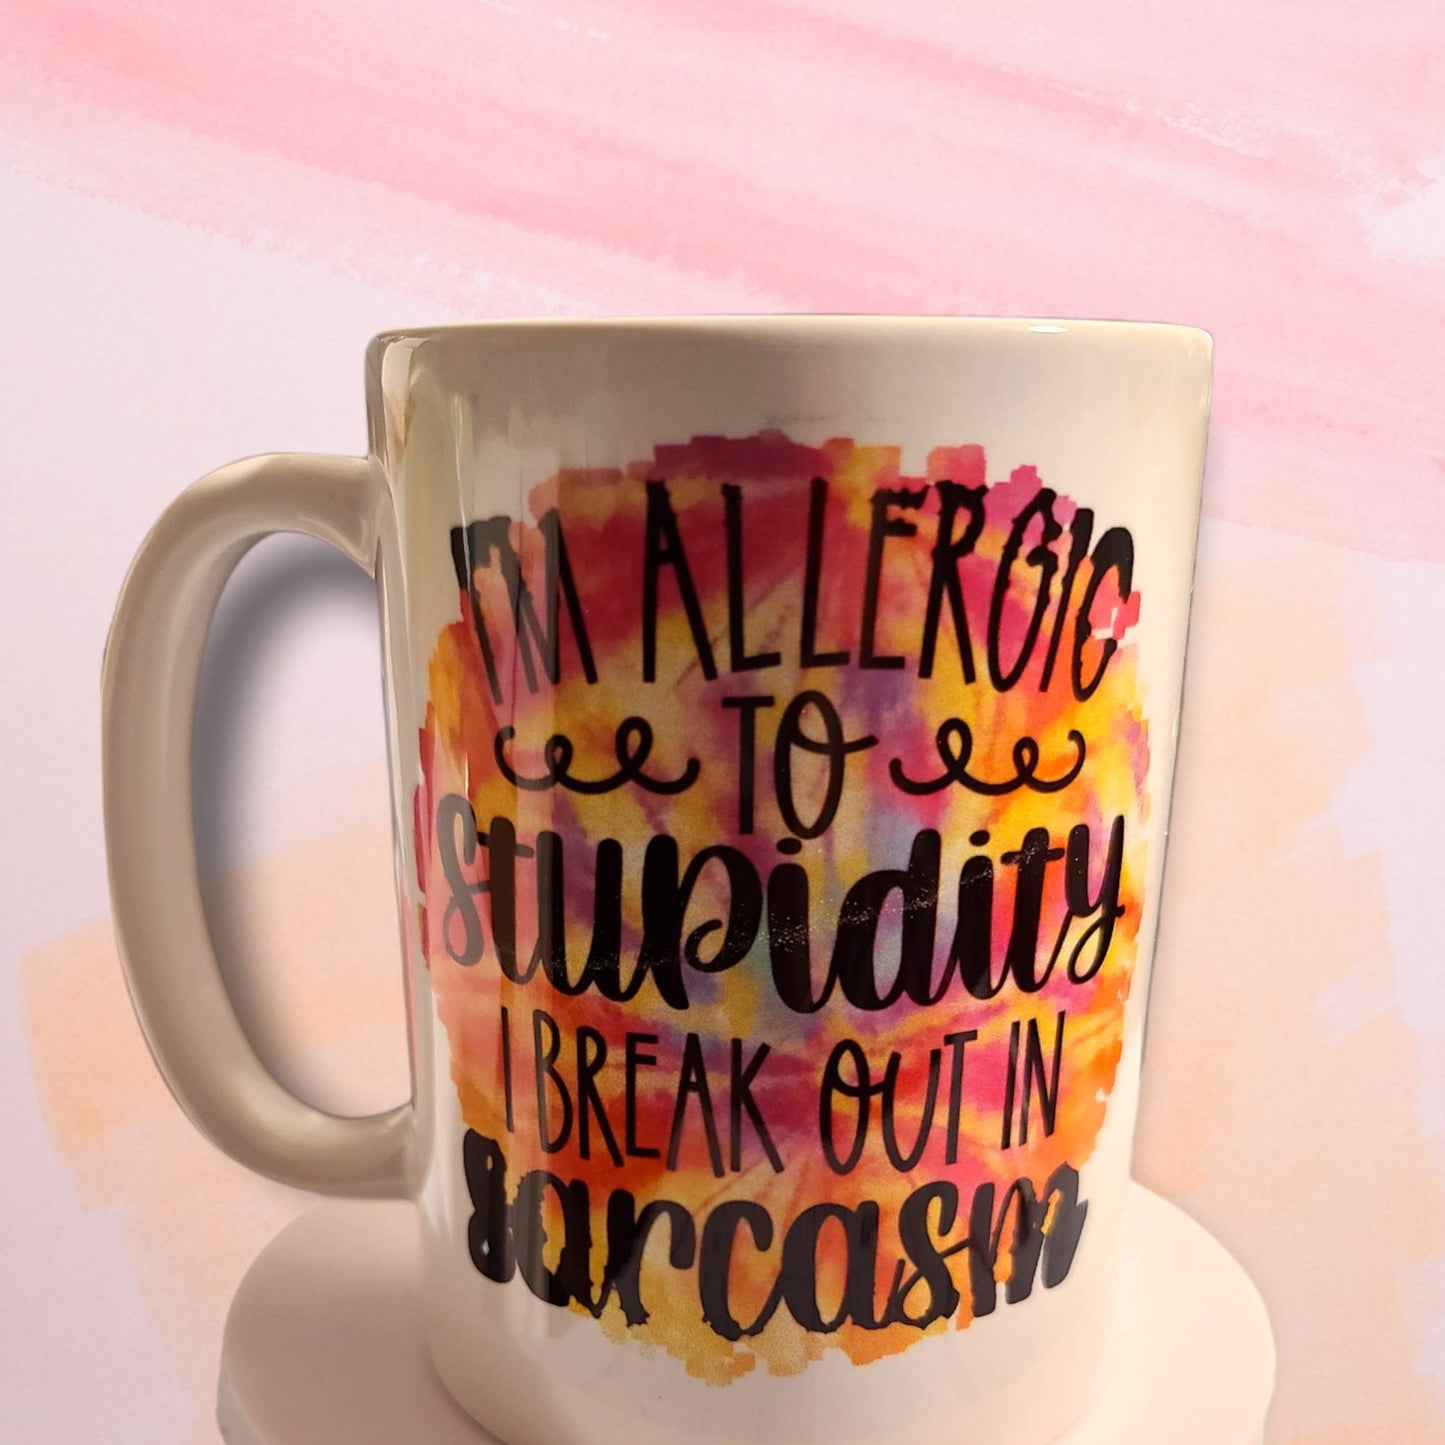 Sarcastic coffee mug with quote. Personalized mug with humorous saying "I'm Allergic to stupidity." Teacup with funny saying. Gift